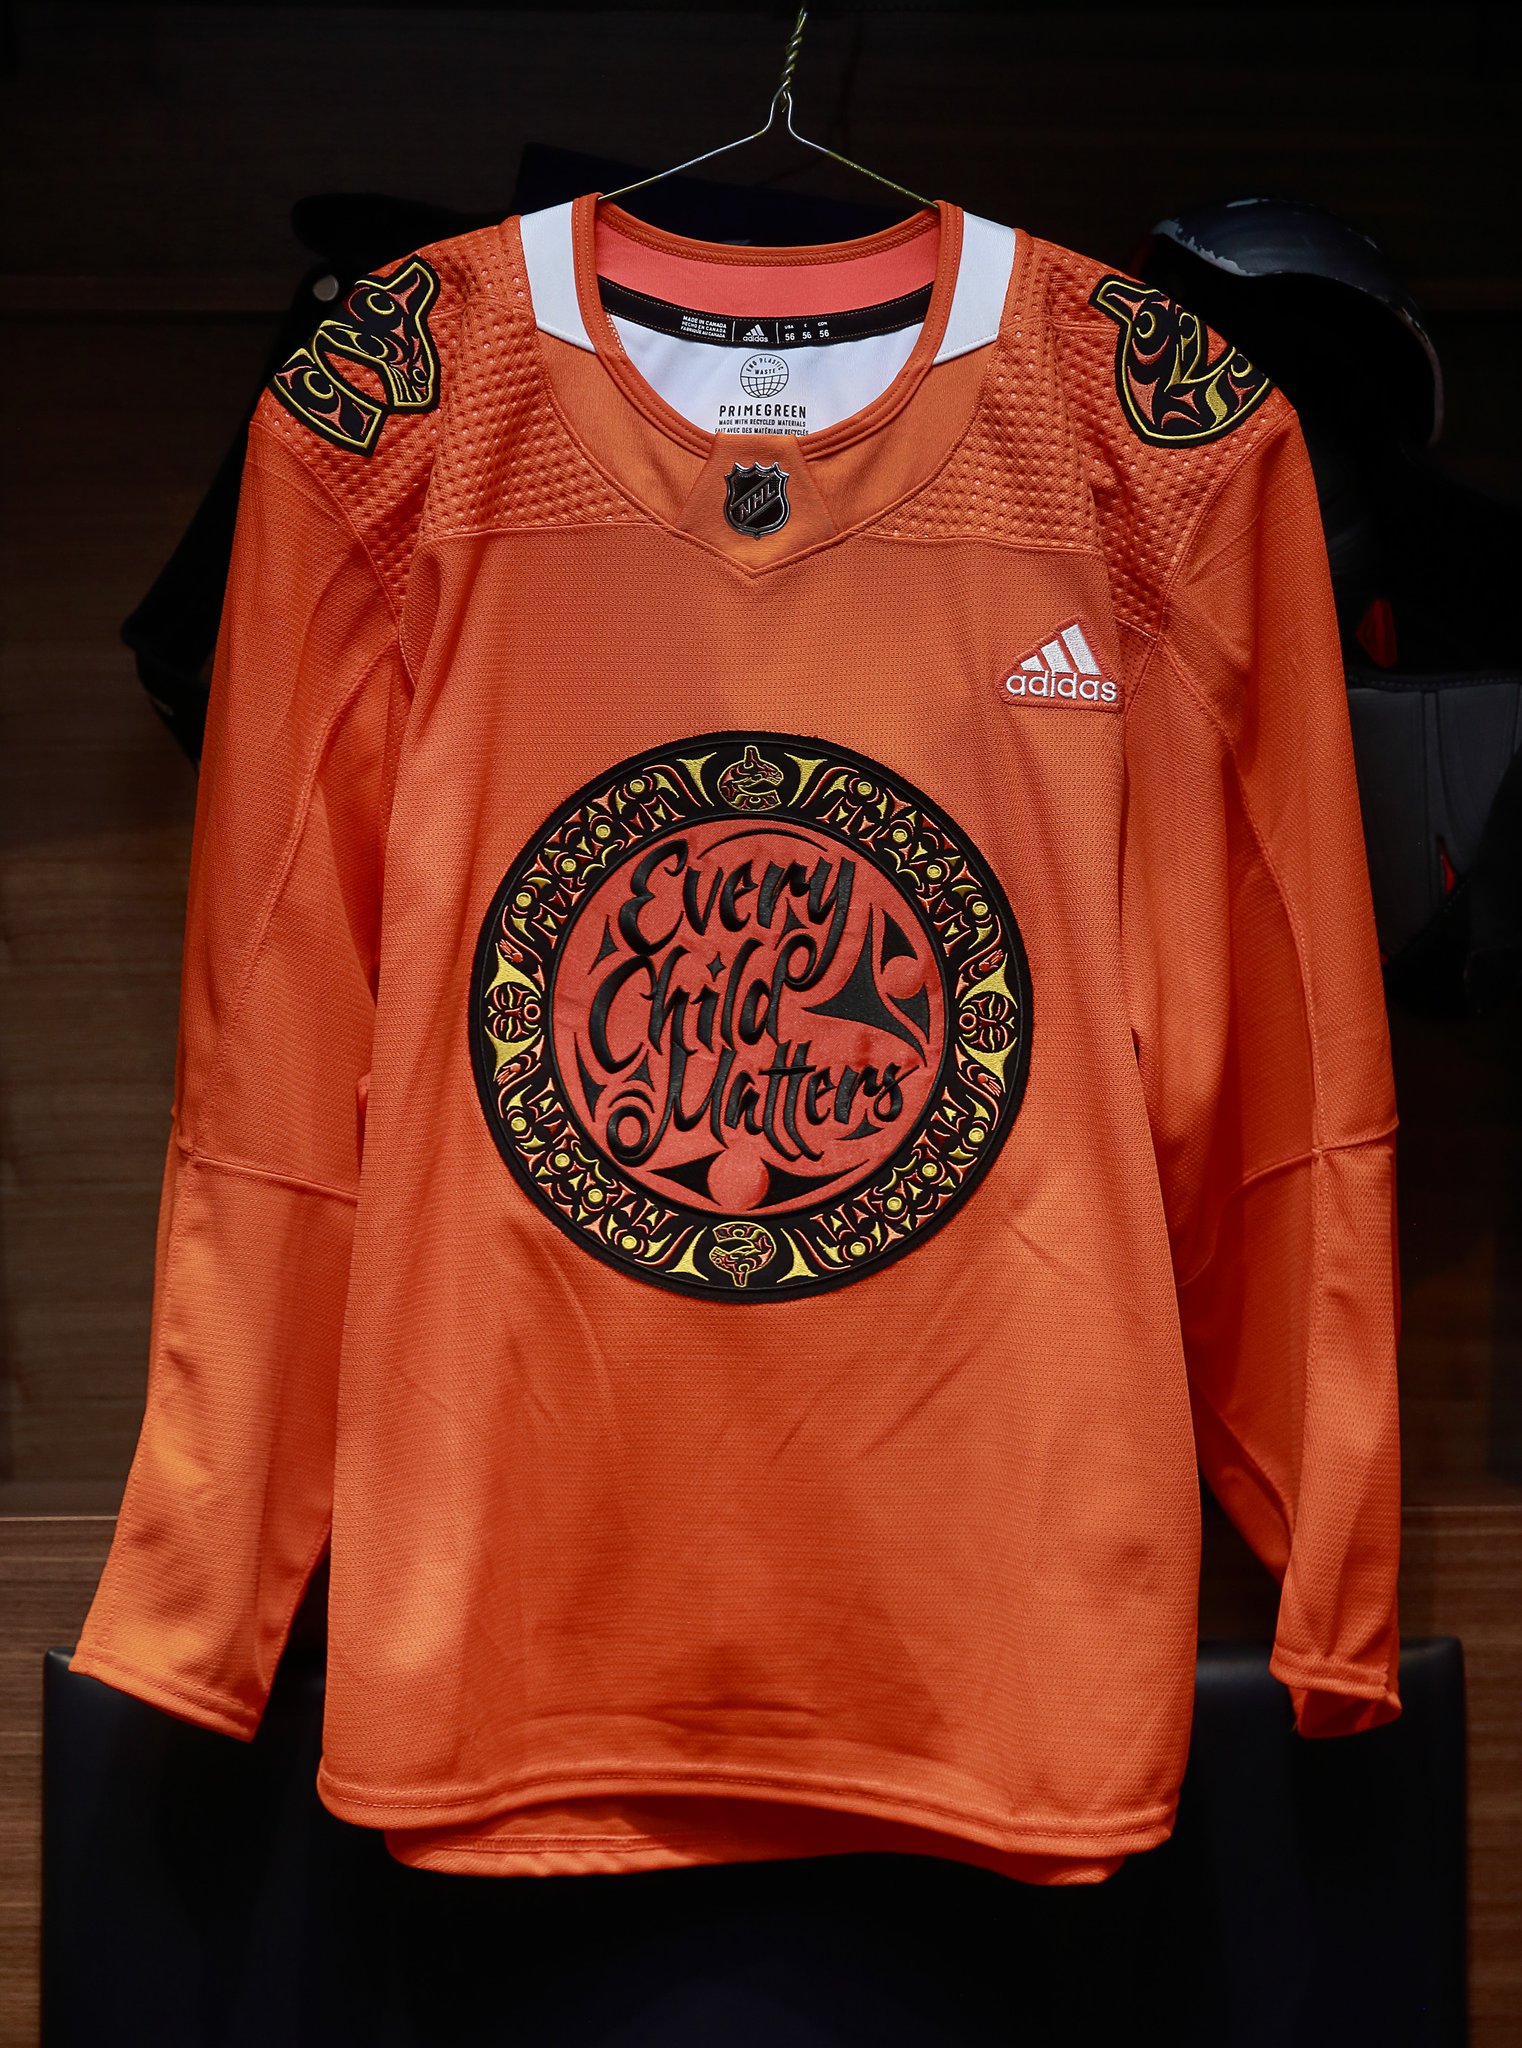 Introducing the 2022 Canucks First Nations Night warm up jersey, designed  by Musqueam artist Chase Gray. The jersey was inspired by…